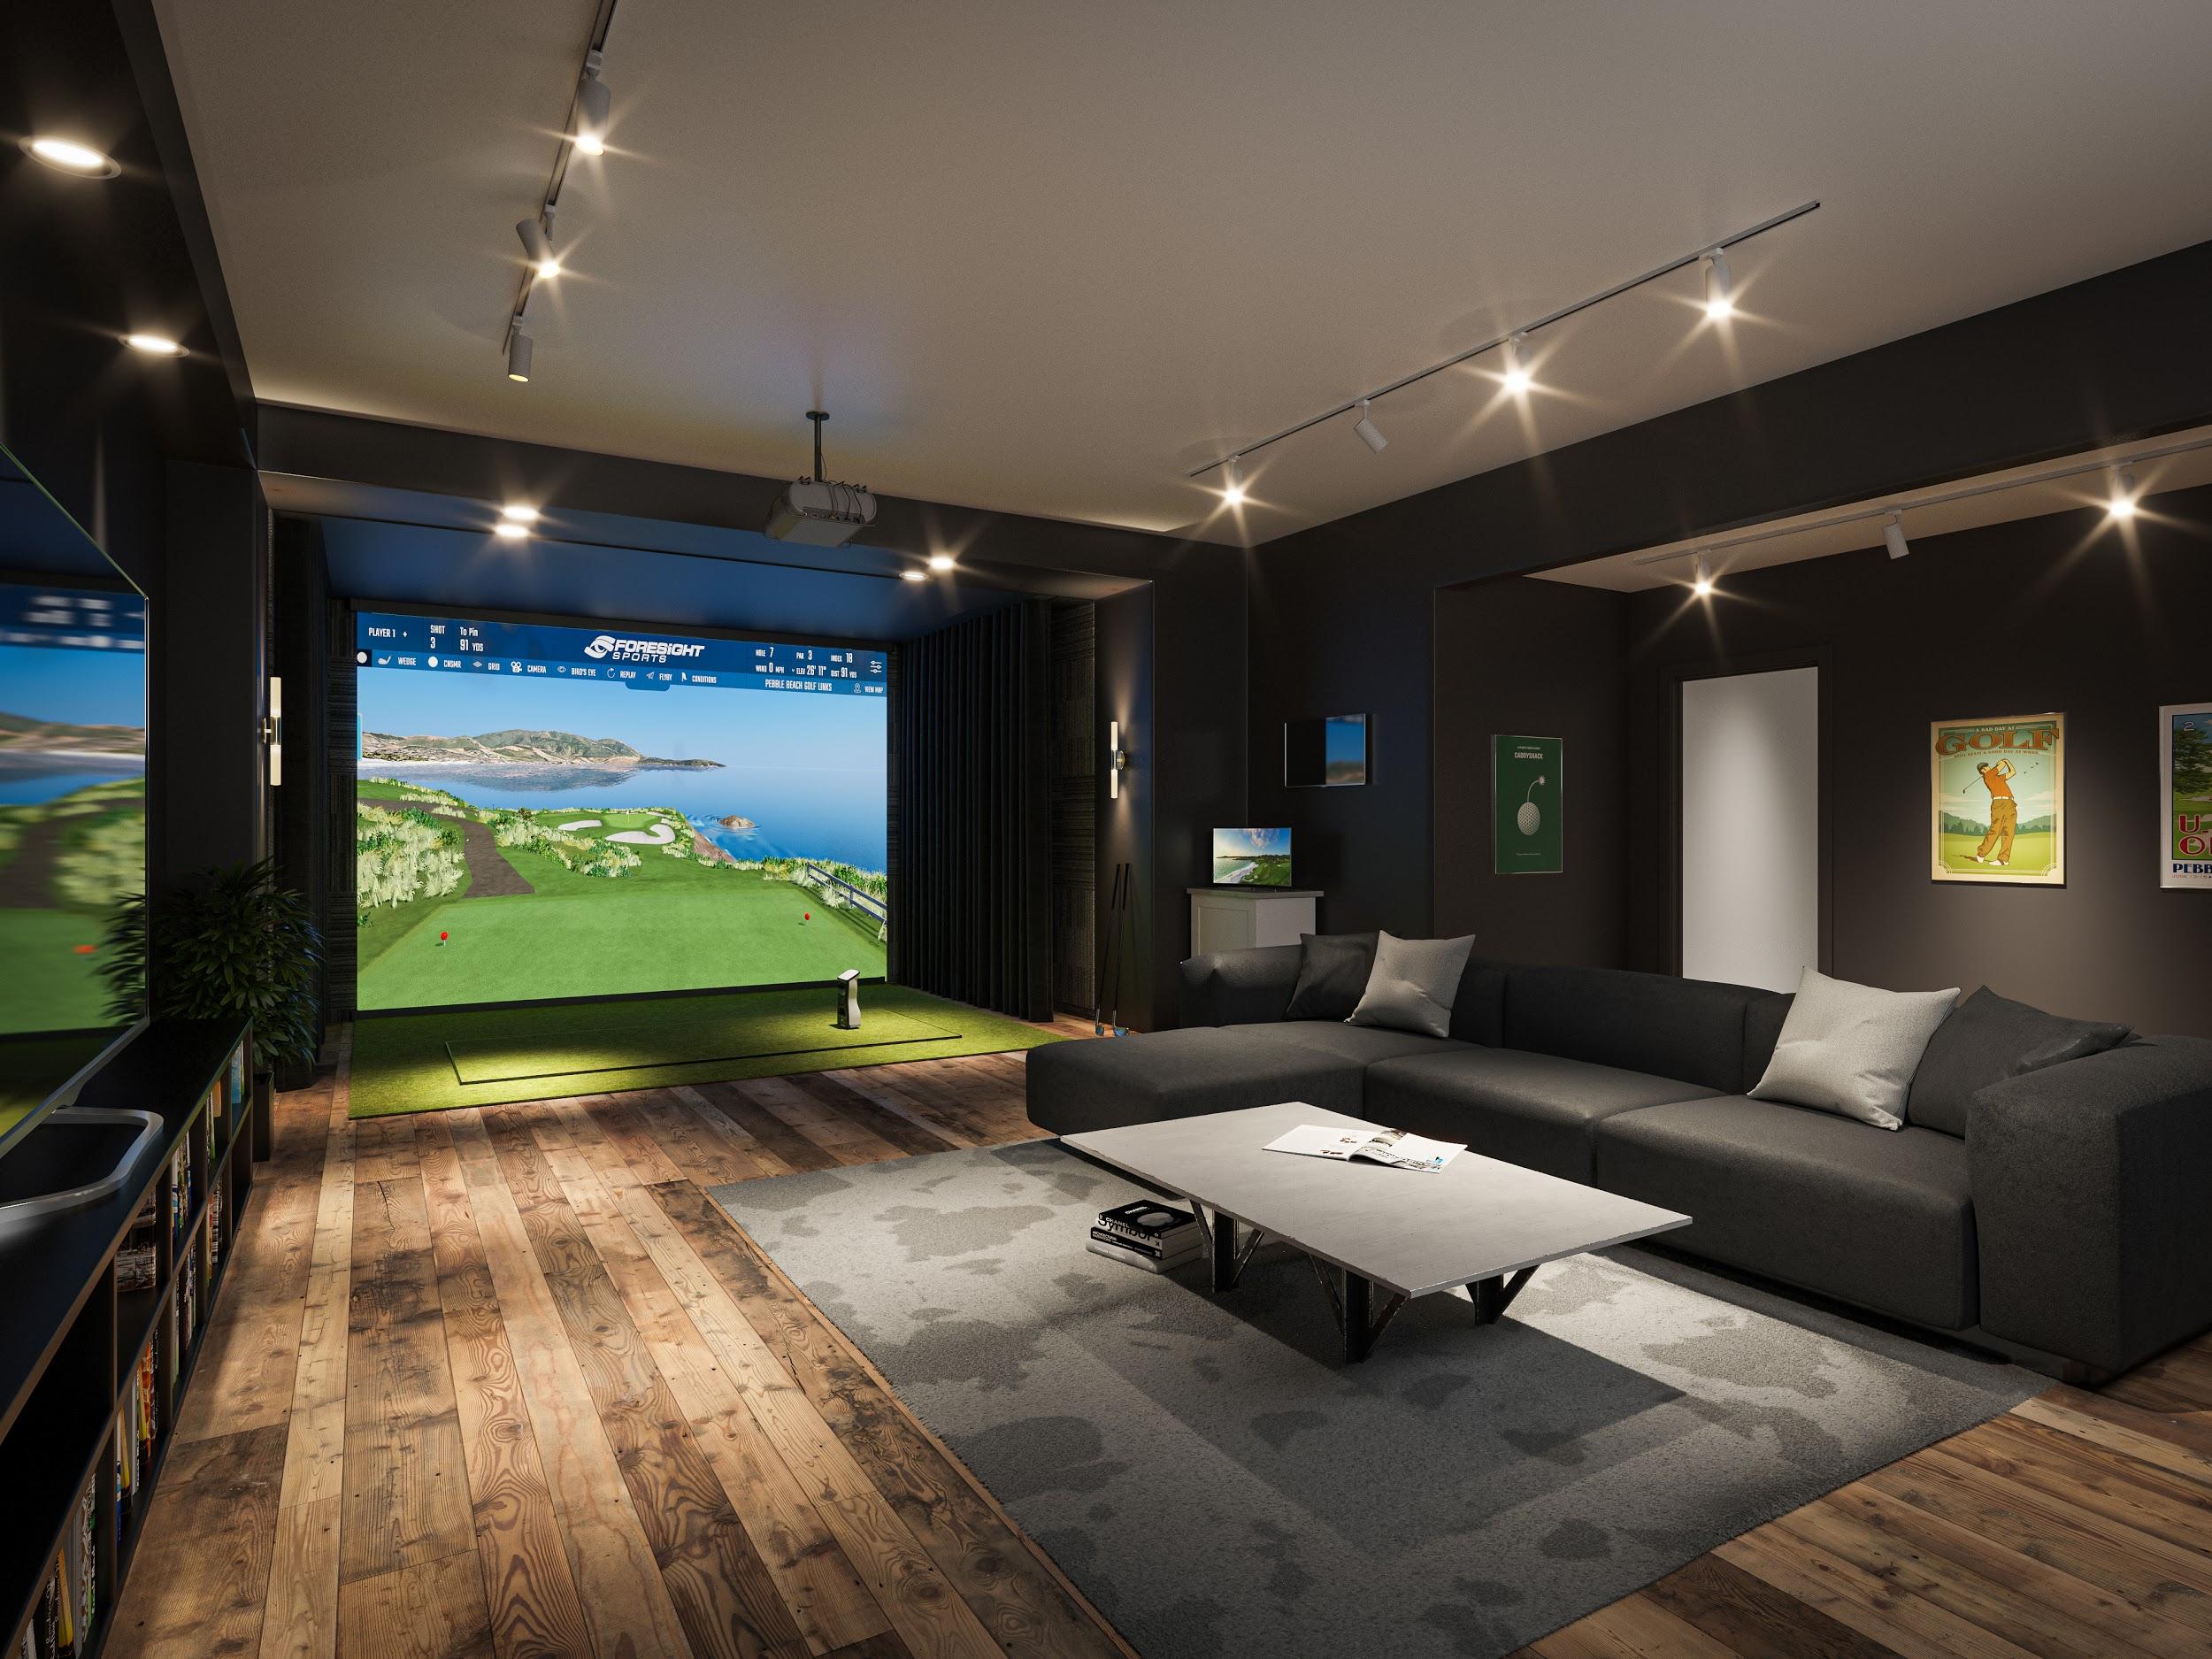 Golf Simulators: The Perfect Way to Improve Your Game